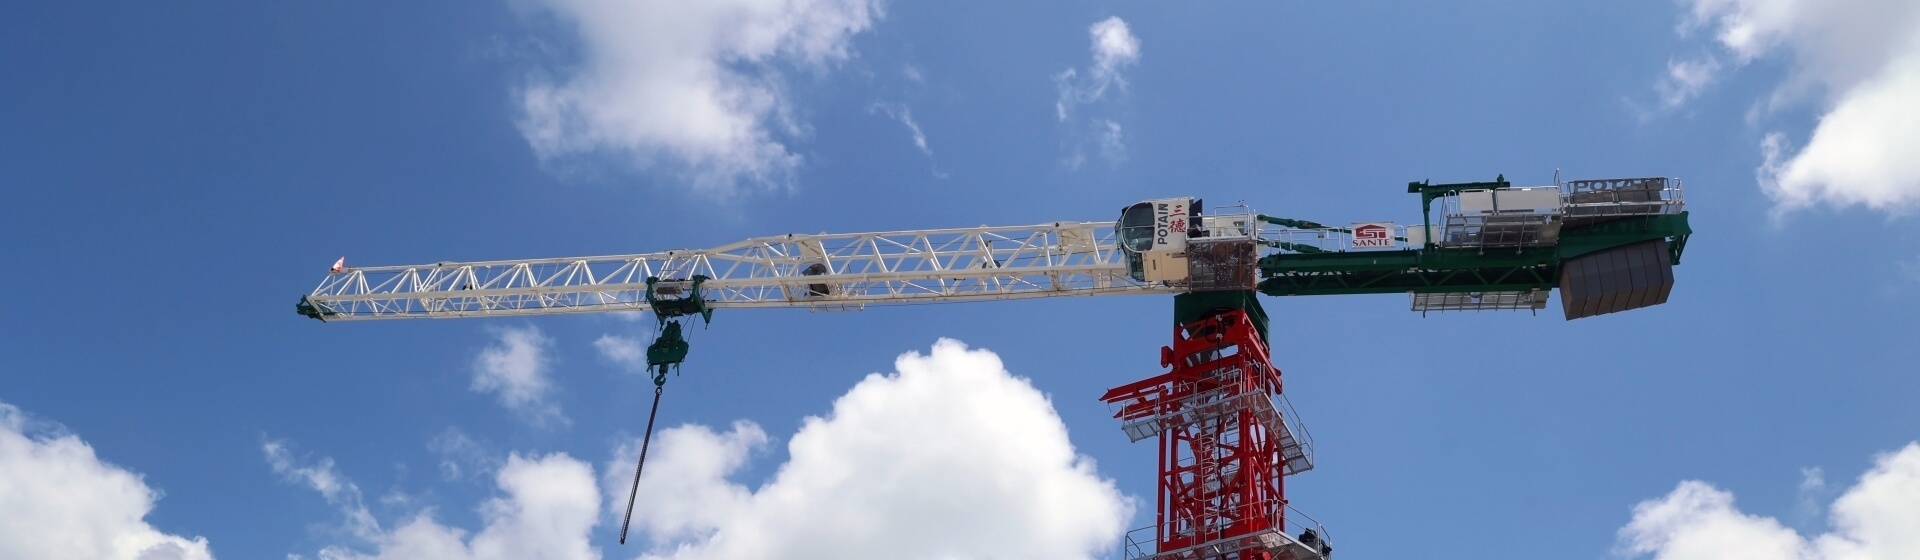 Compact-and-powerful--Potain-MCT-565-A-crane-debuts-in-Singapore.jpg